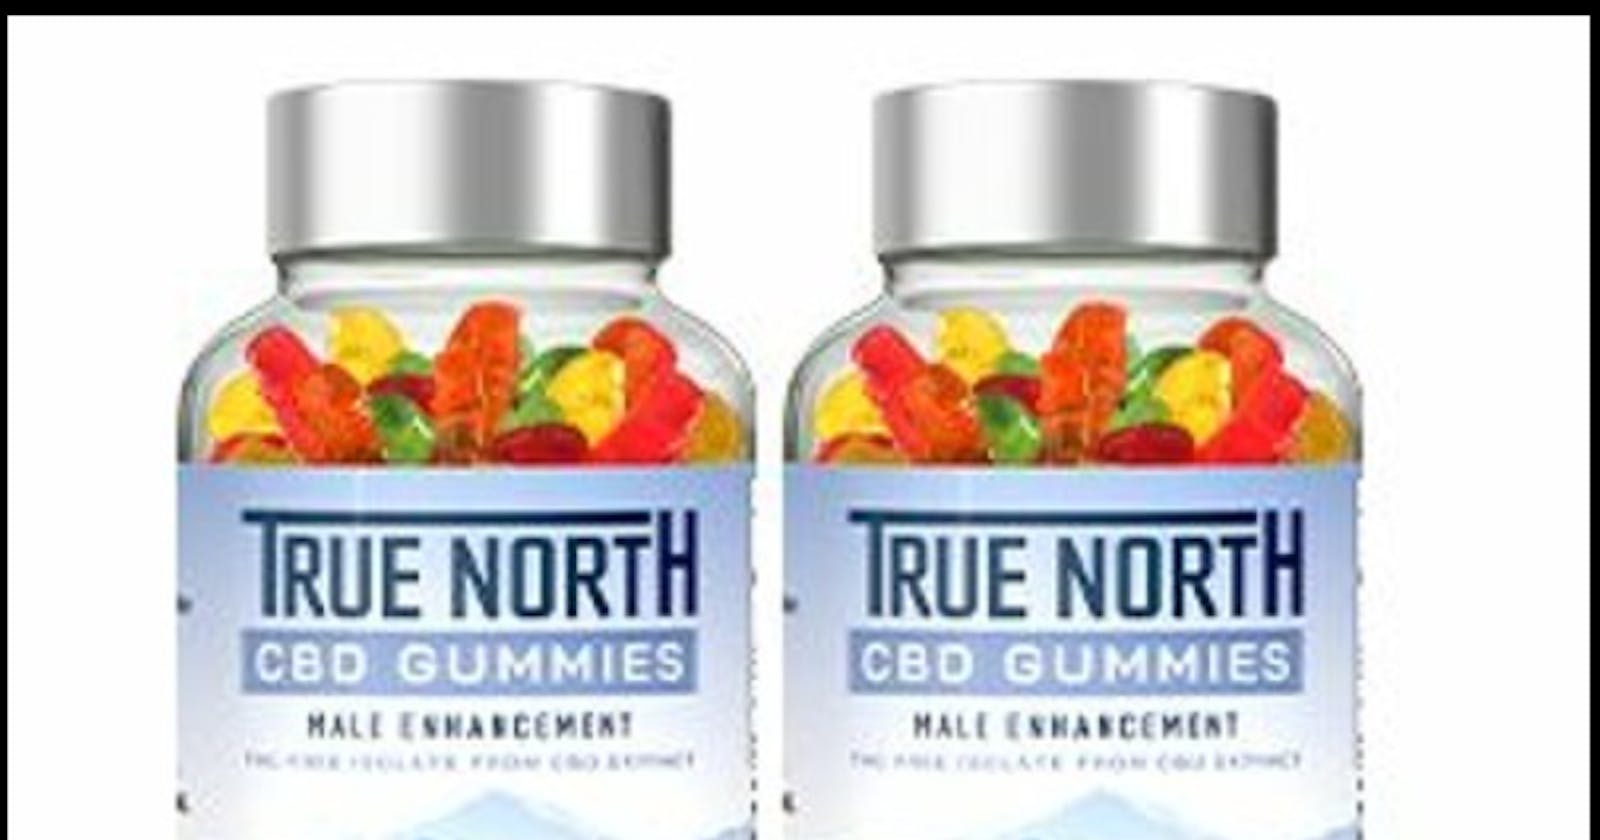 True North CBD Gummies Reviews, Price, For Sale, For Pain, Shark Tank & Where To Buy?